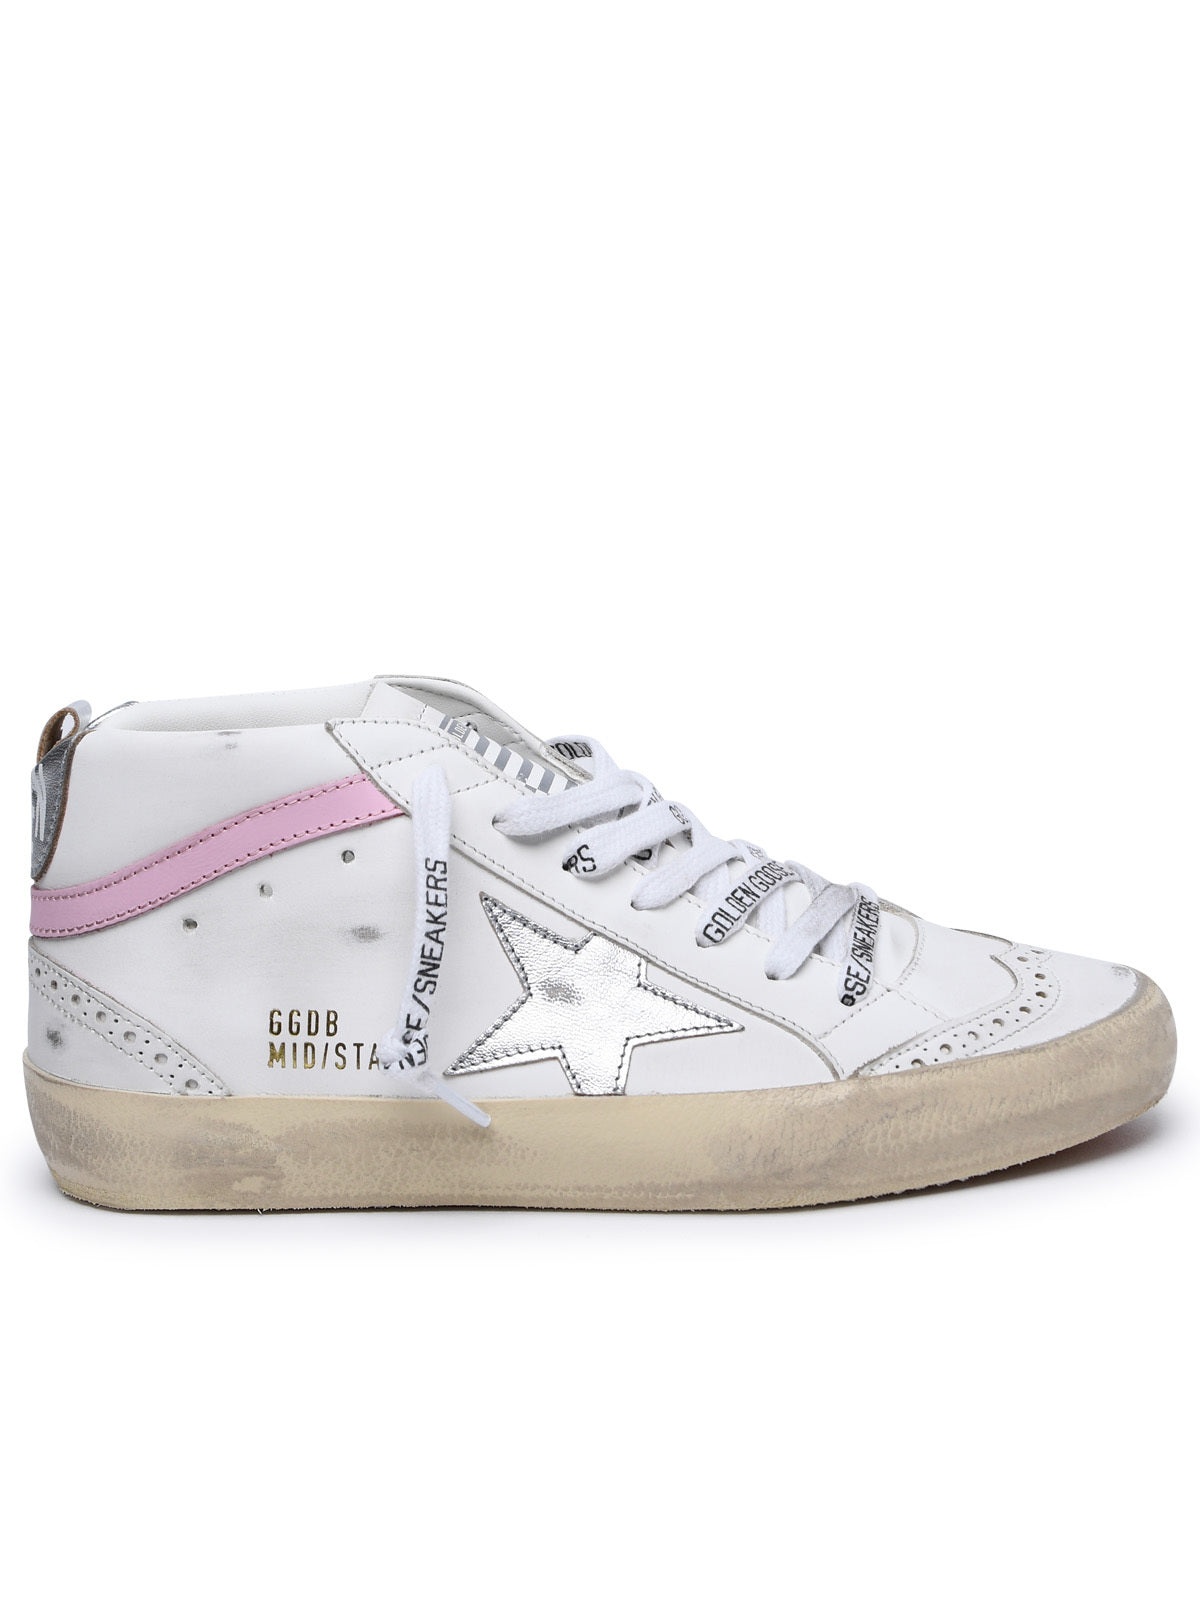 Golden Goose Woman Golden Goose 'Mid Star' White Leather Sneakers - 1